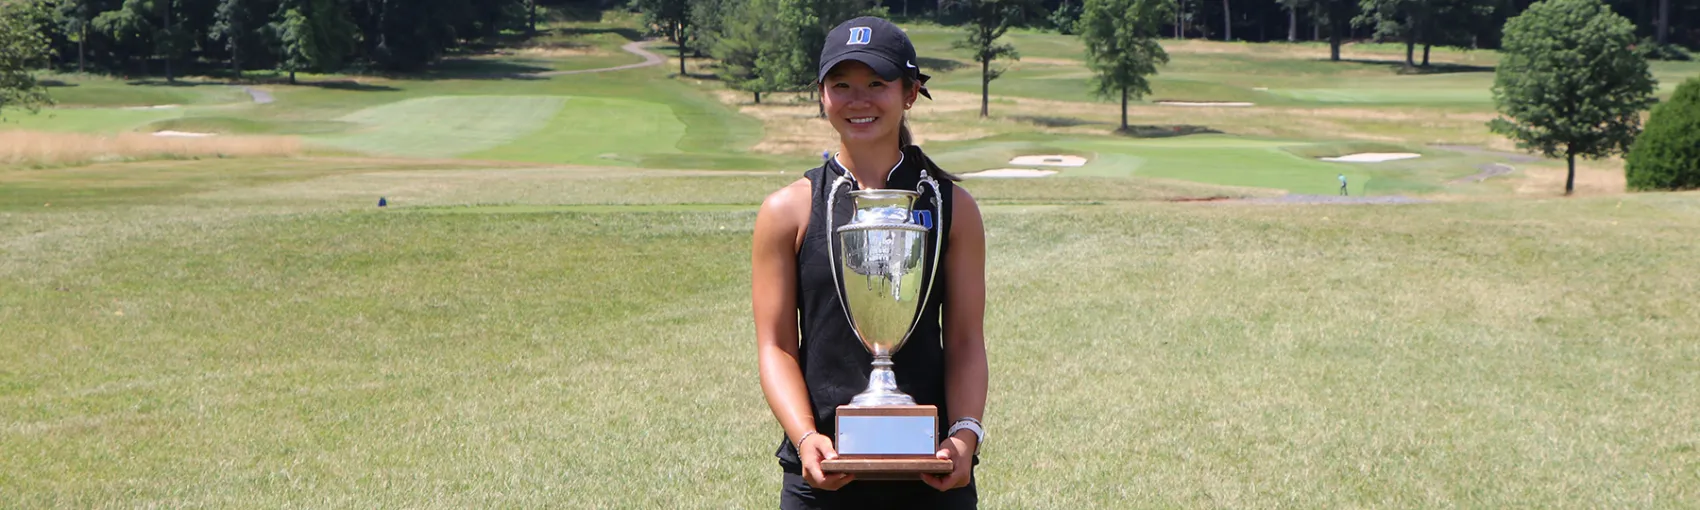 Li Cruises to Victory at 99th New Jersey Women’s Amateur Championship